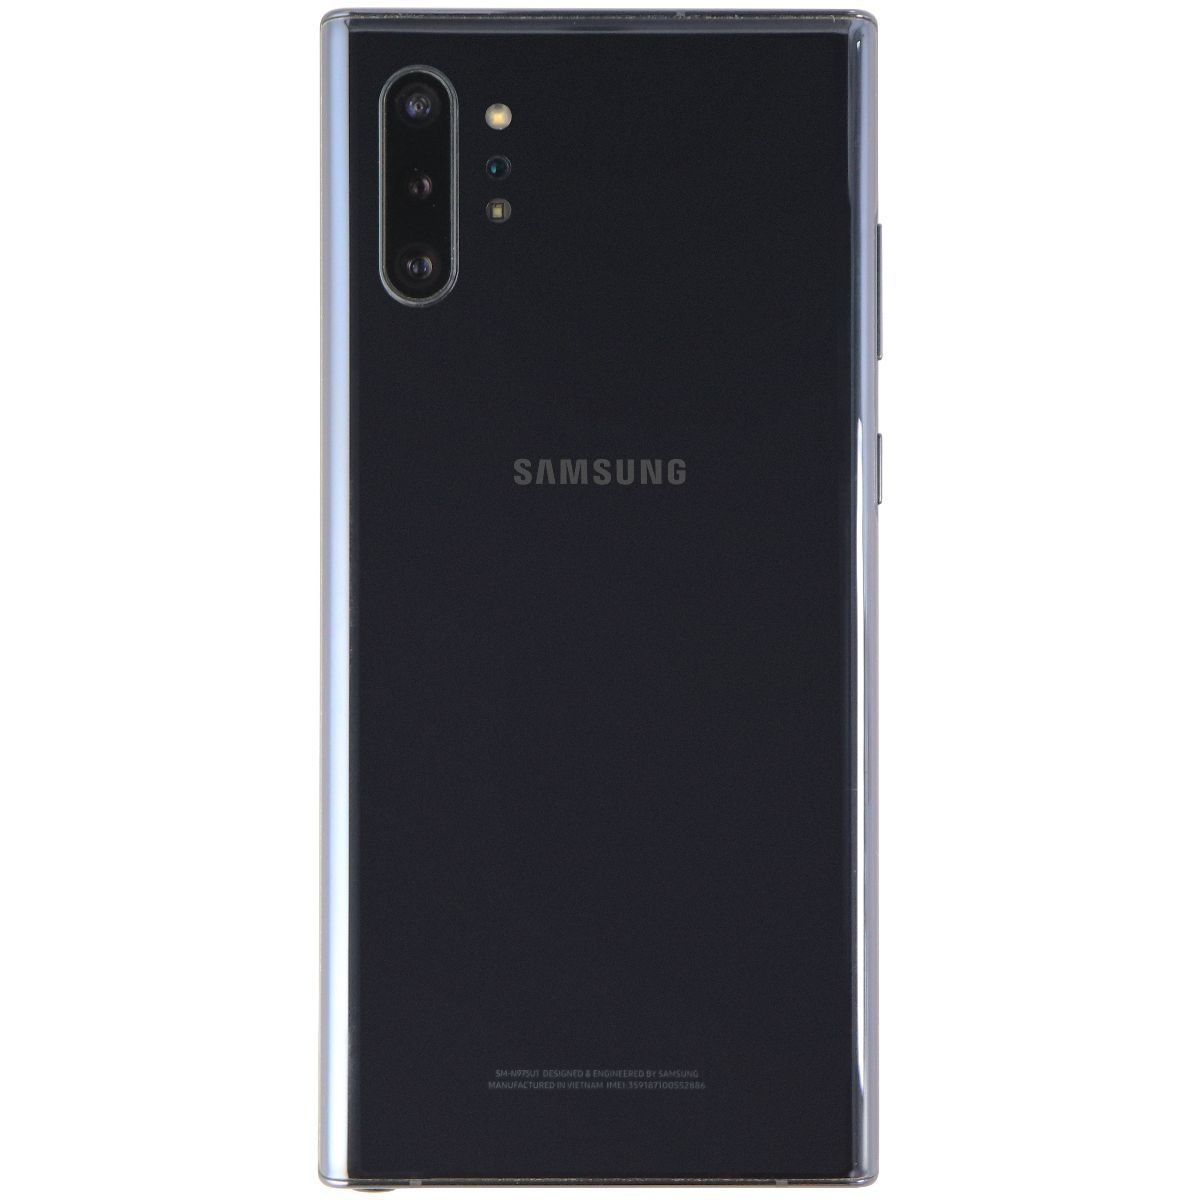 Samsung Galaxy Note10+ (6.8-inch) SM-N975U (Sprint Only) - 256GB / Aura Black Cell Phones & Smartphones Samsung    - Simple Cell Bulk Wholesale Pricing - USA Seller